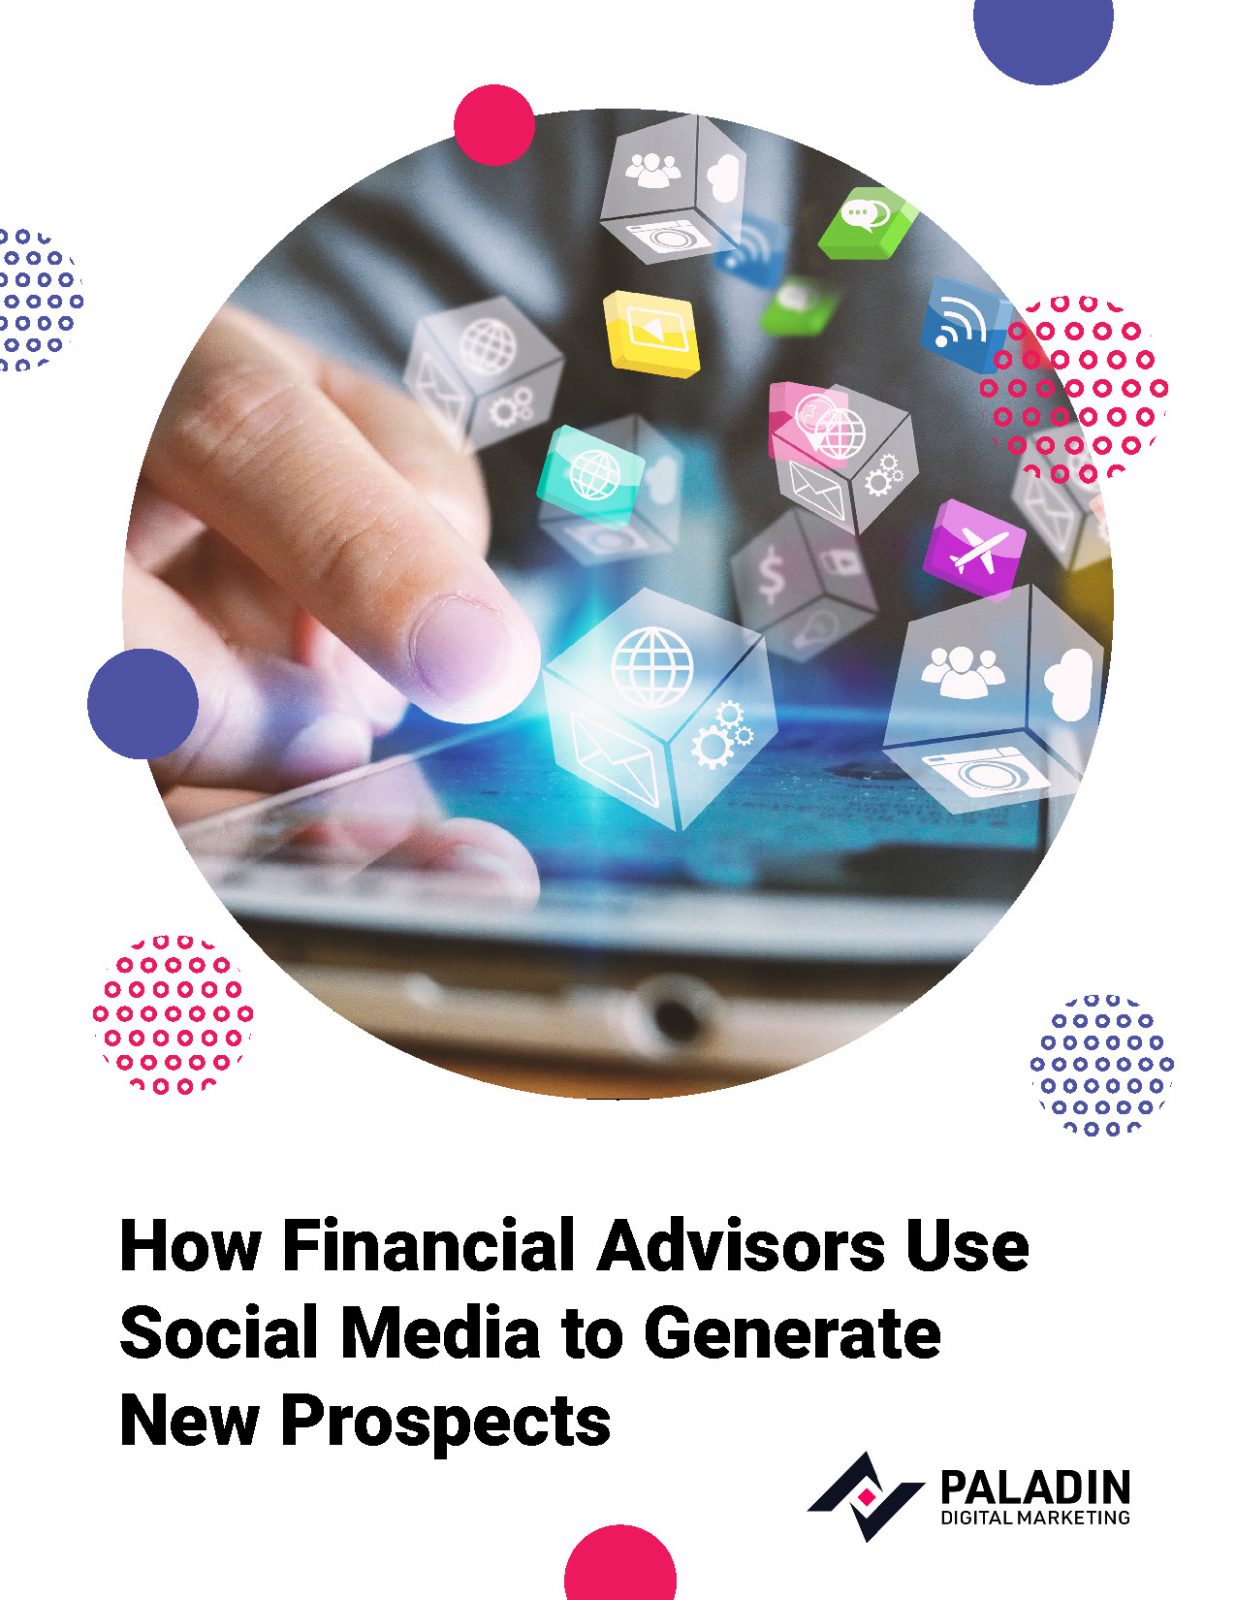 How Financial Advisors Use Social Media to Generate New Prospects